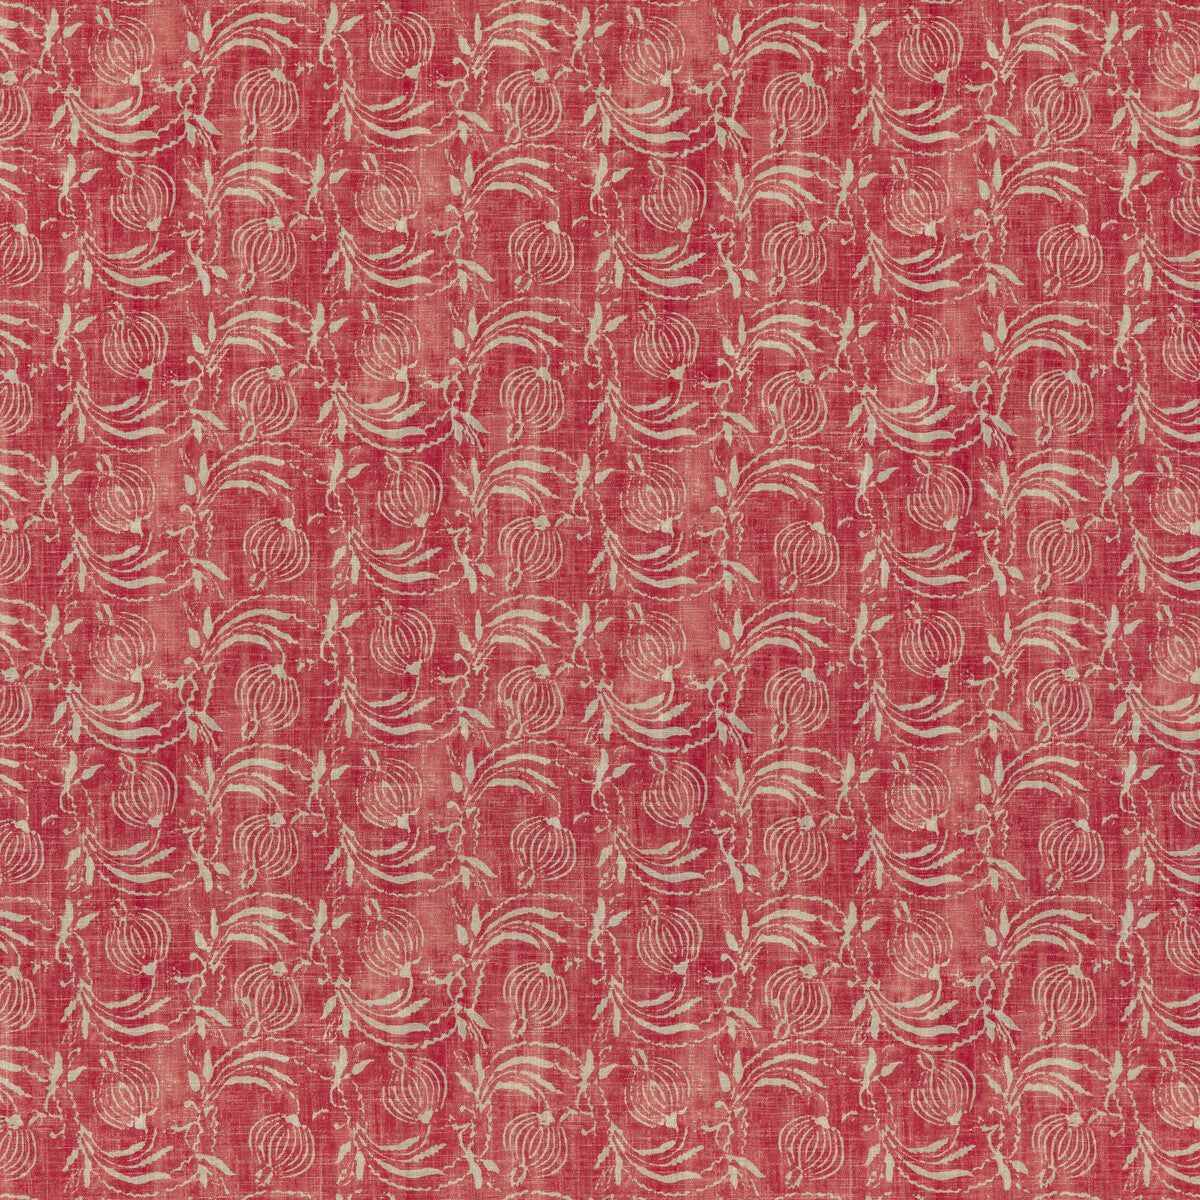 Pomegranate fabric in red color - pattern BP10825.1.0 - by G P &amp; J Baker in the Coromandel Small Prints collection